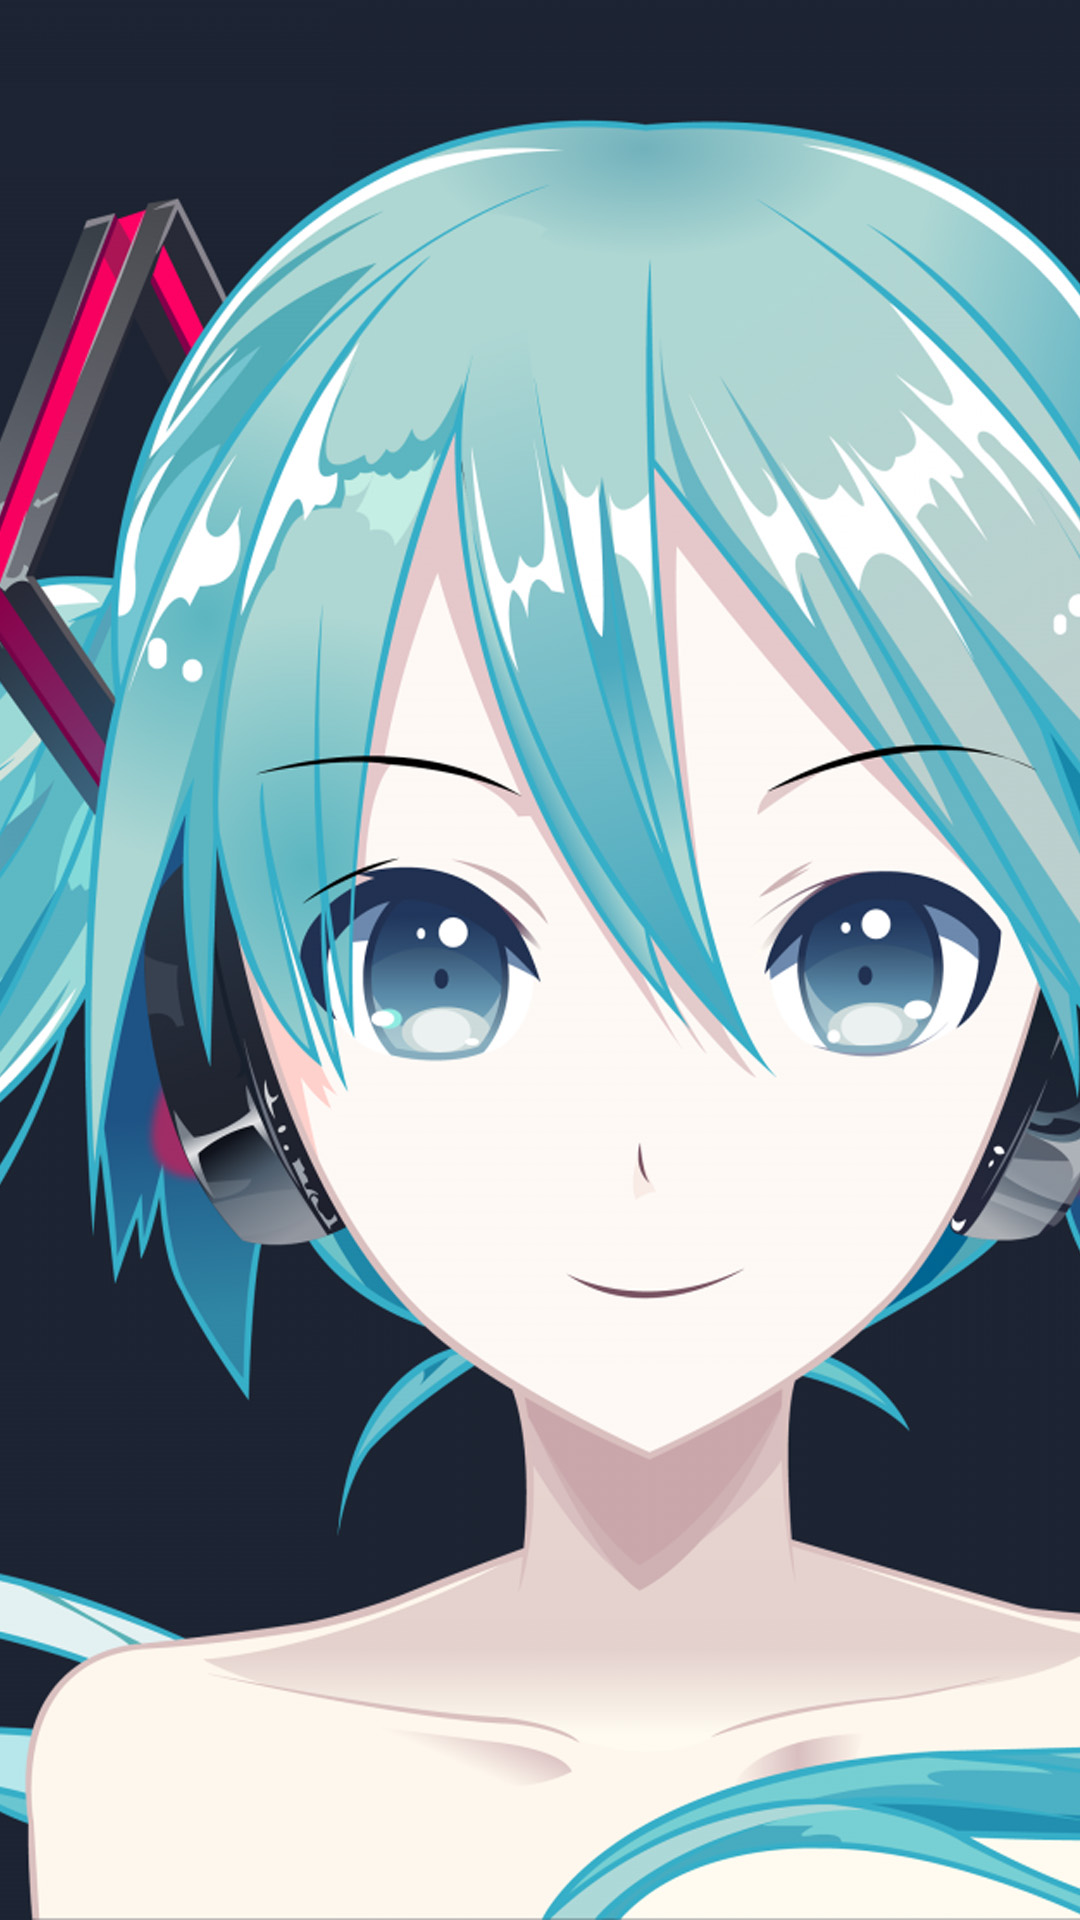 171 Images About Miku Hatsune On We Heart It  Anime Girl With Ear Cat Cute  Transparent PNG  450x588  Free Download on NicePNG